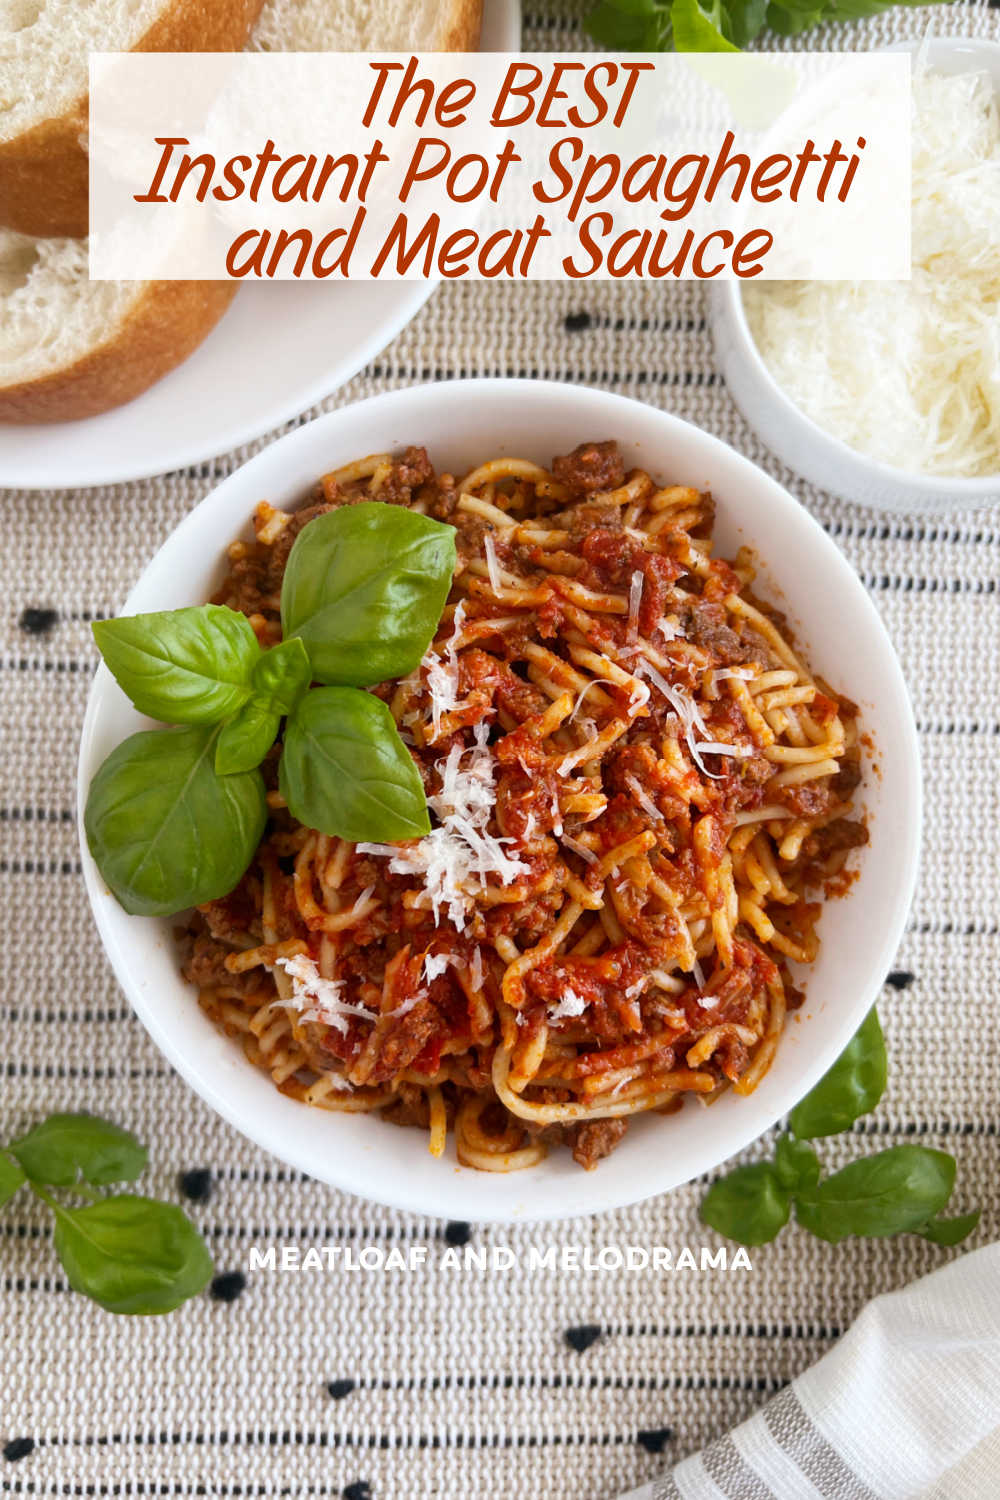 Instant Pot Spaghetti and Meat Sauce with spaghetti noodles, ground beef and pasta sauce is an easy dinner perfect for busy weeknights. This easy Instant Pot spaghetti recipe is a family favorite ready in just 30 minutes! via @meamel